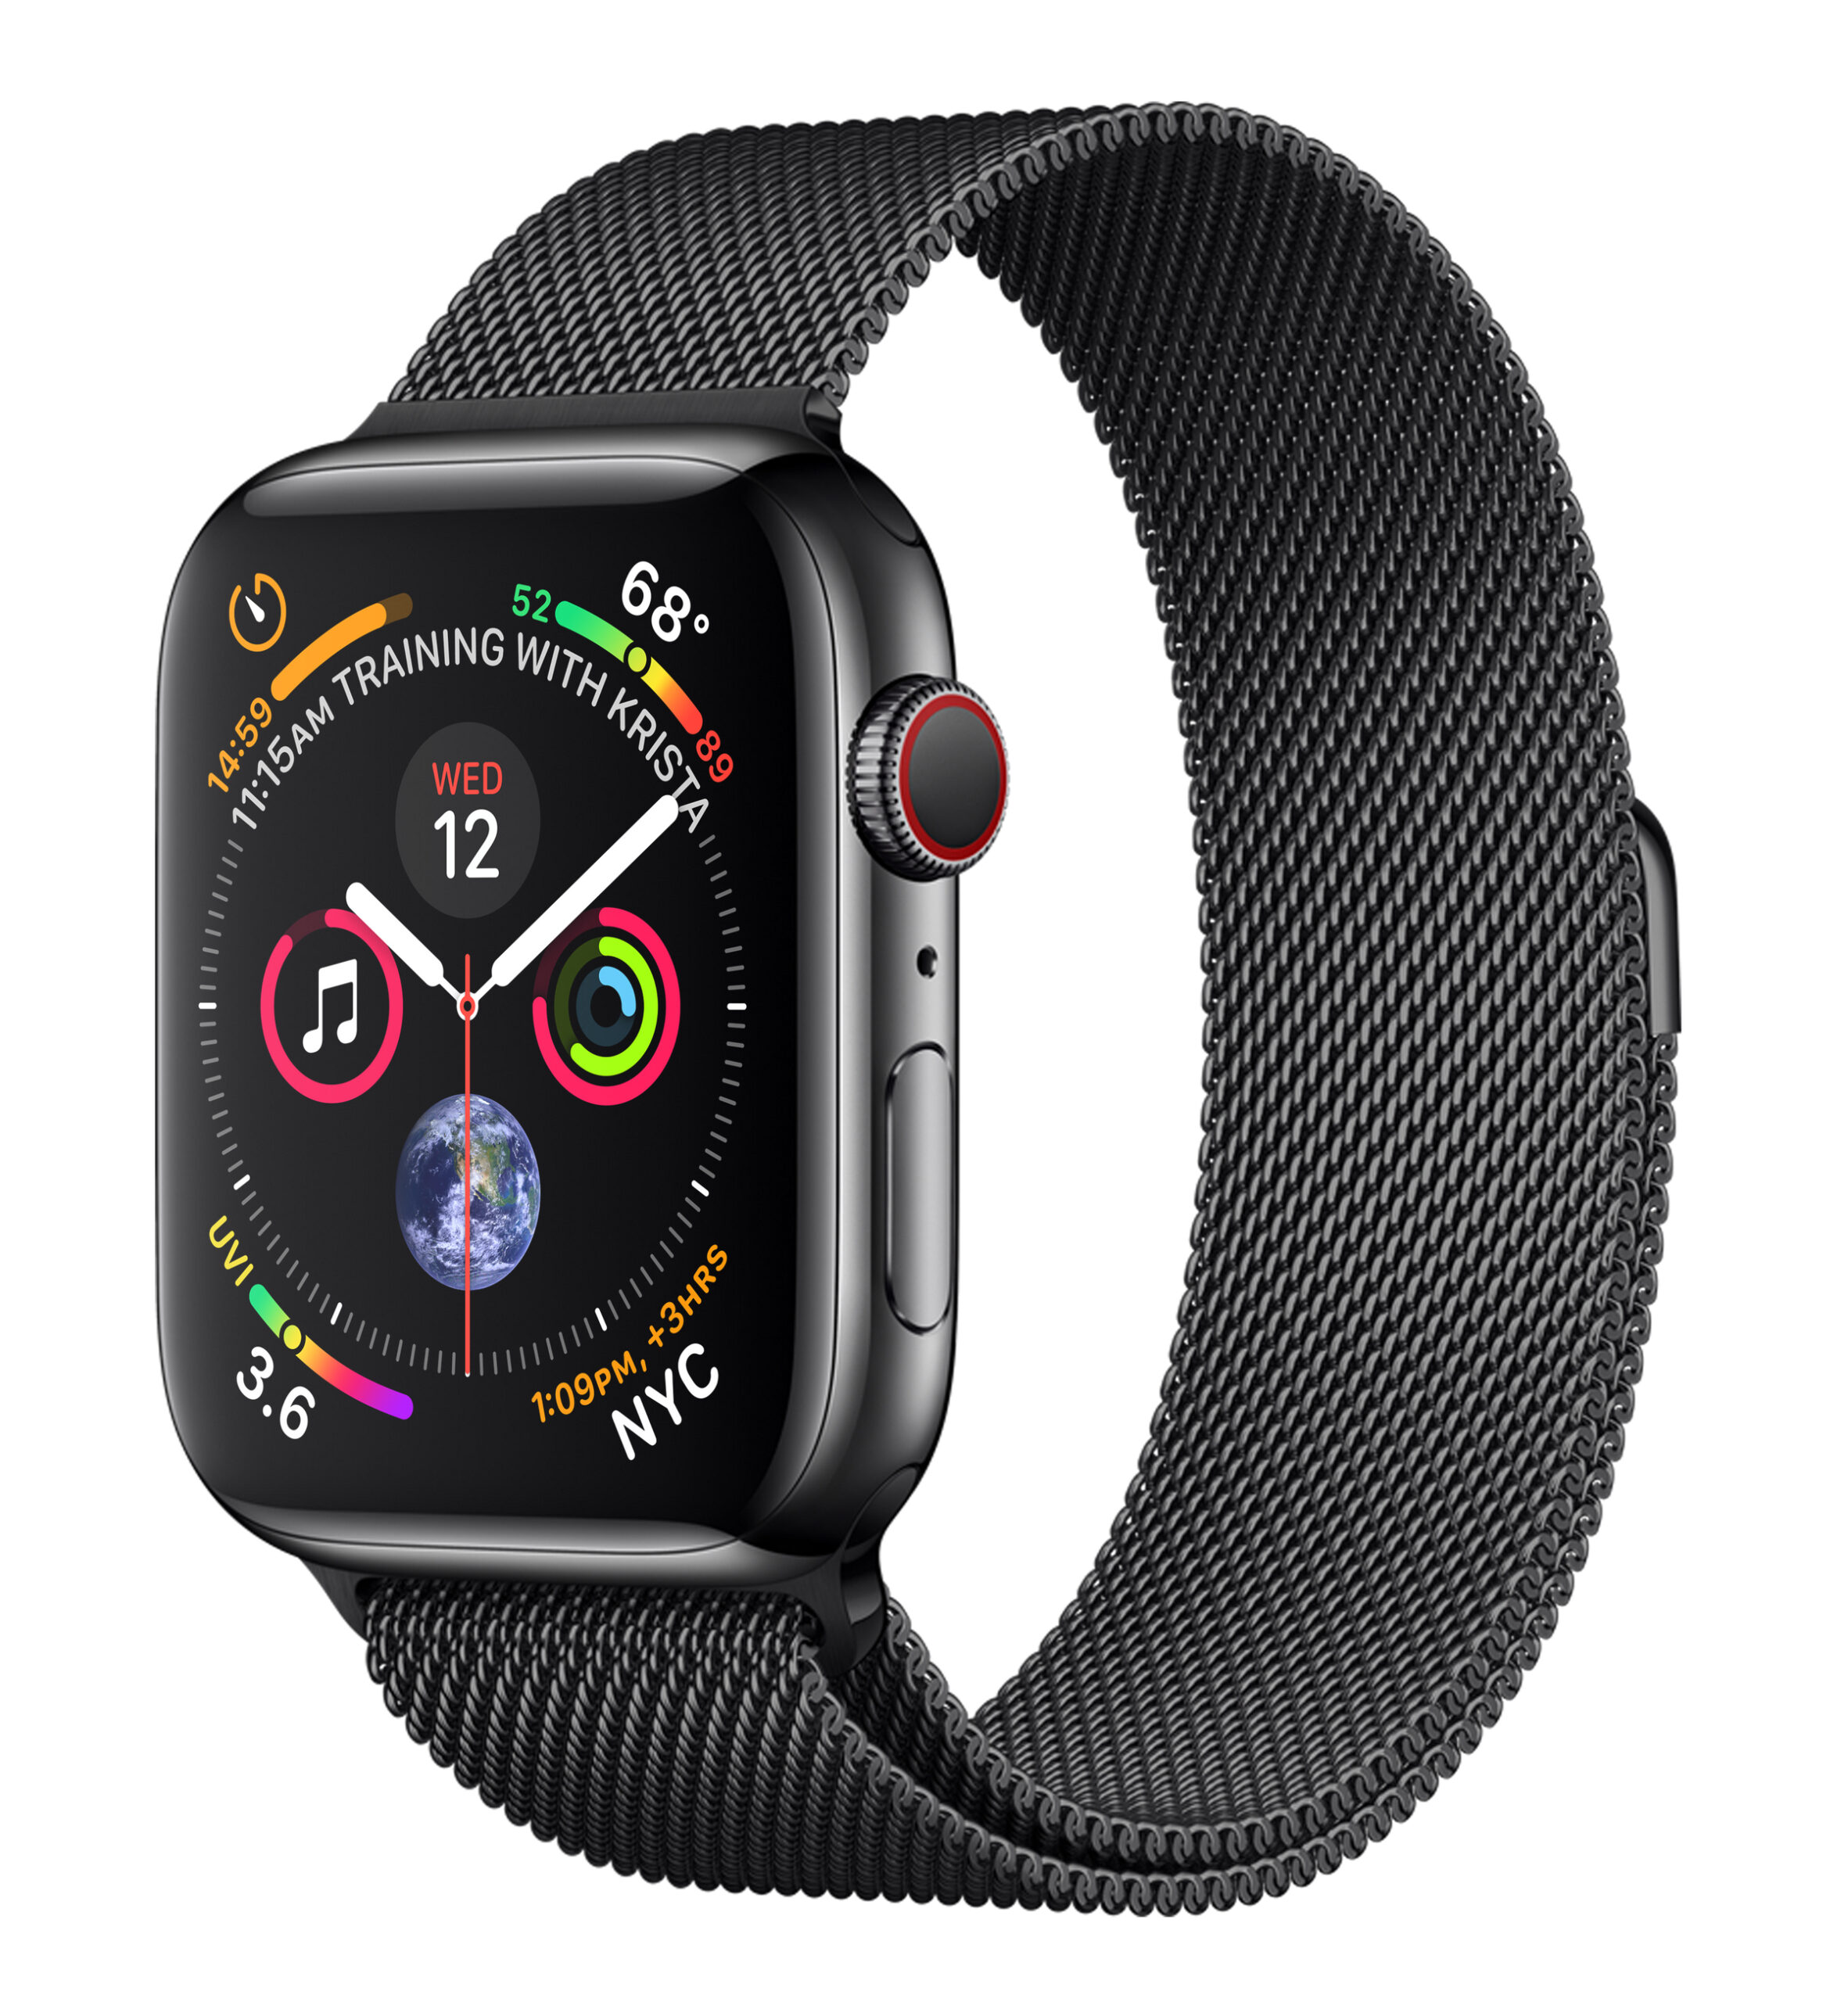 MTV62LL/A - $658 - Apple Watch Series 4 (GPS + Cellular, 44mm, Space Black Stainless Steel 